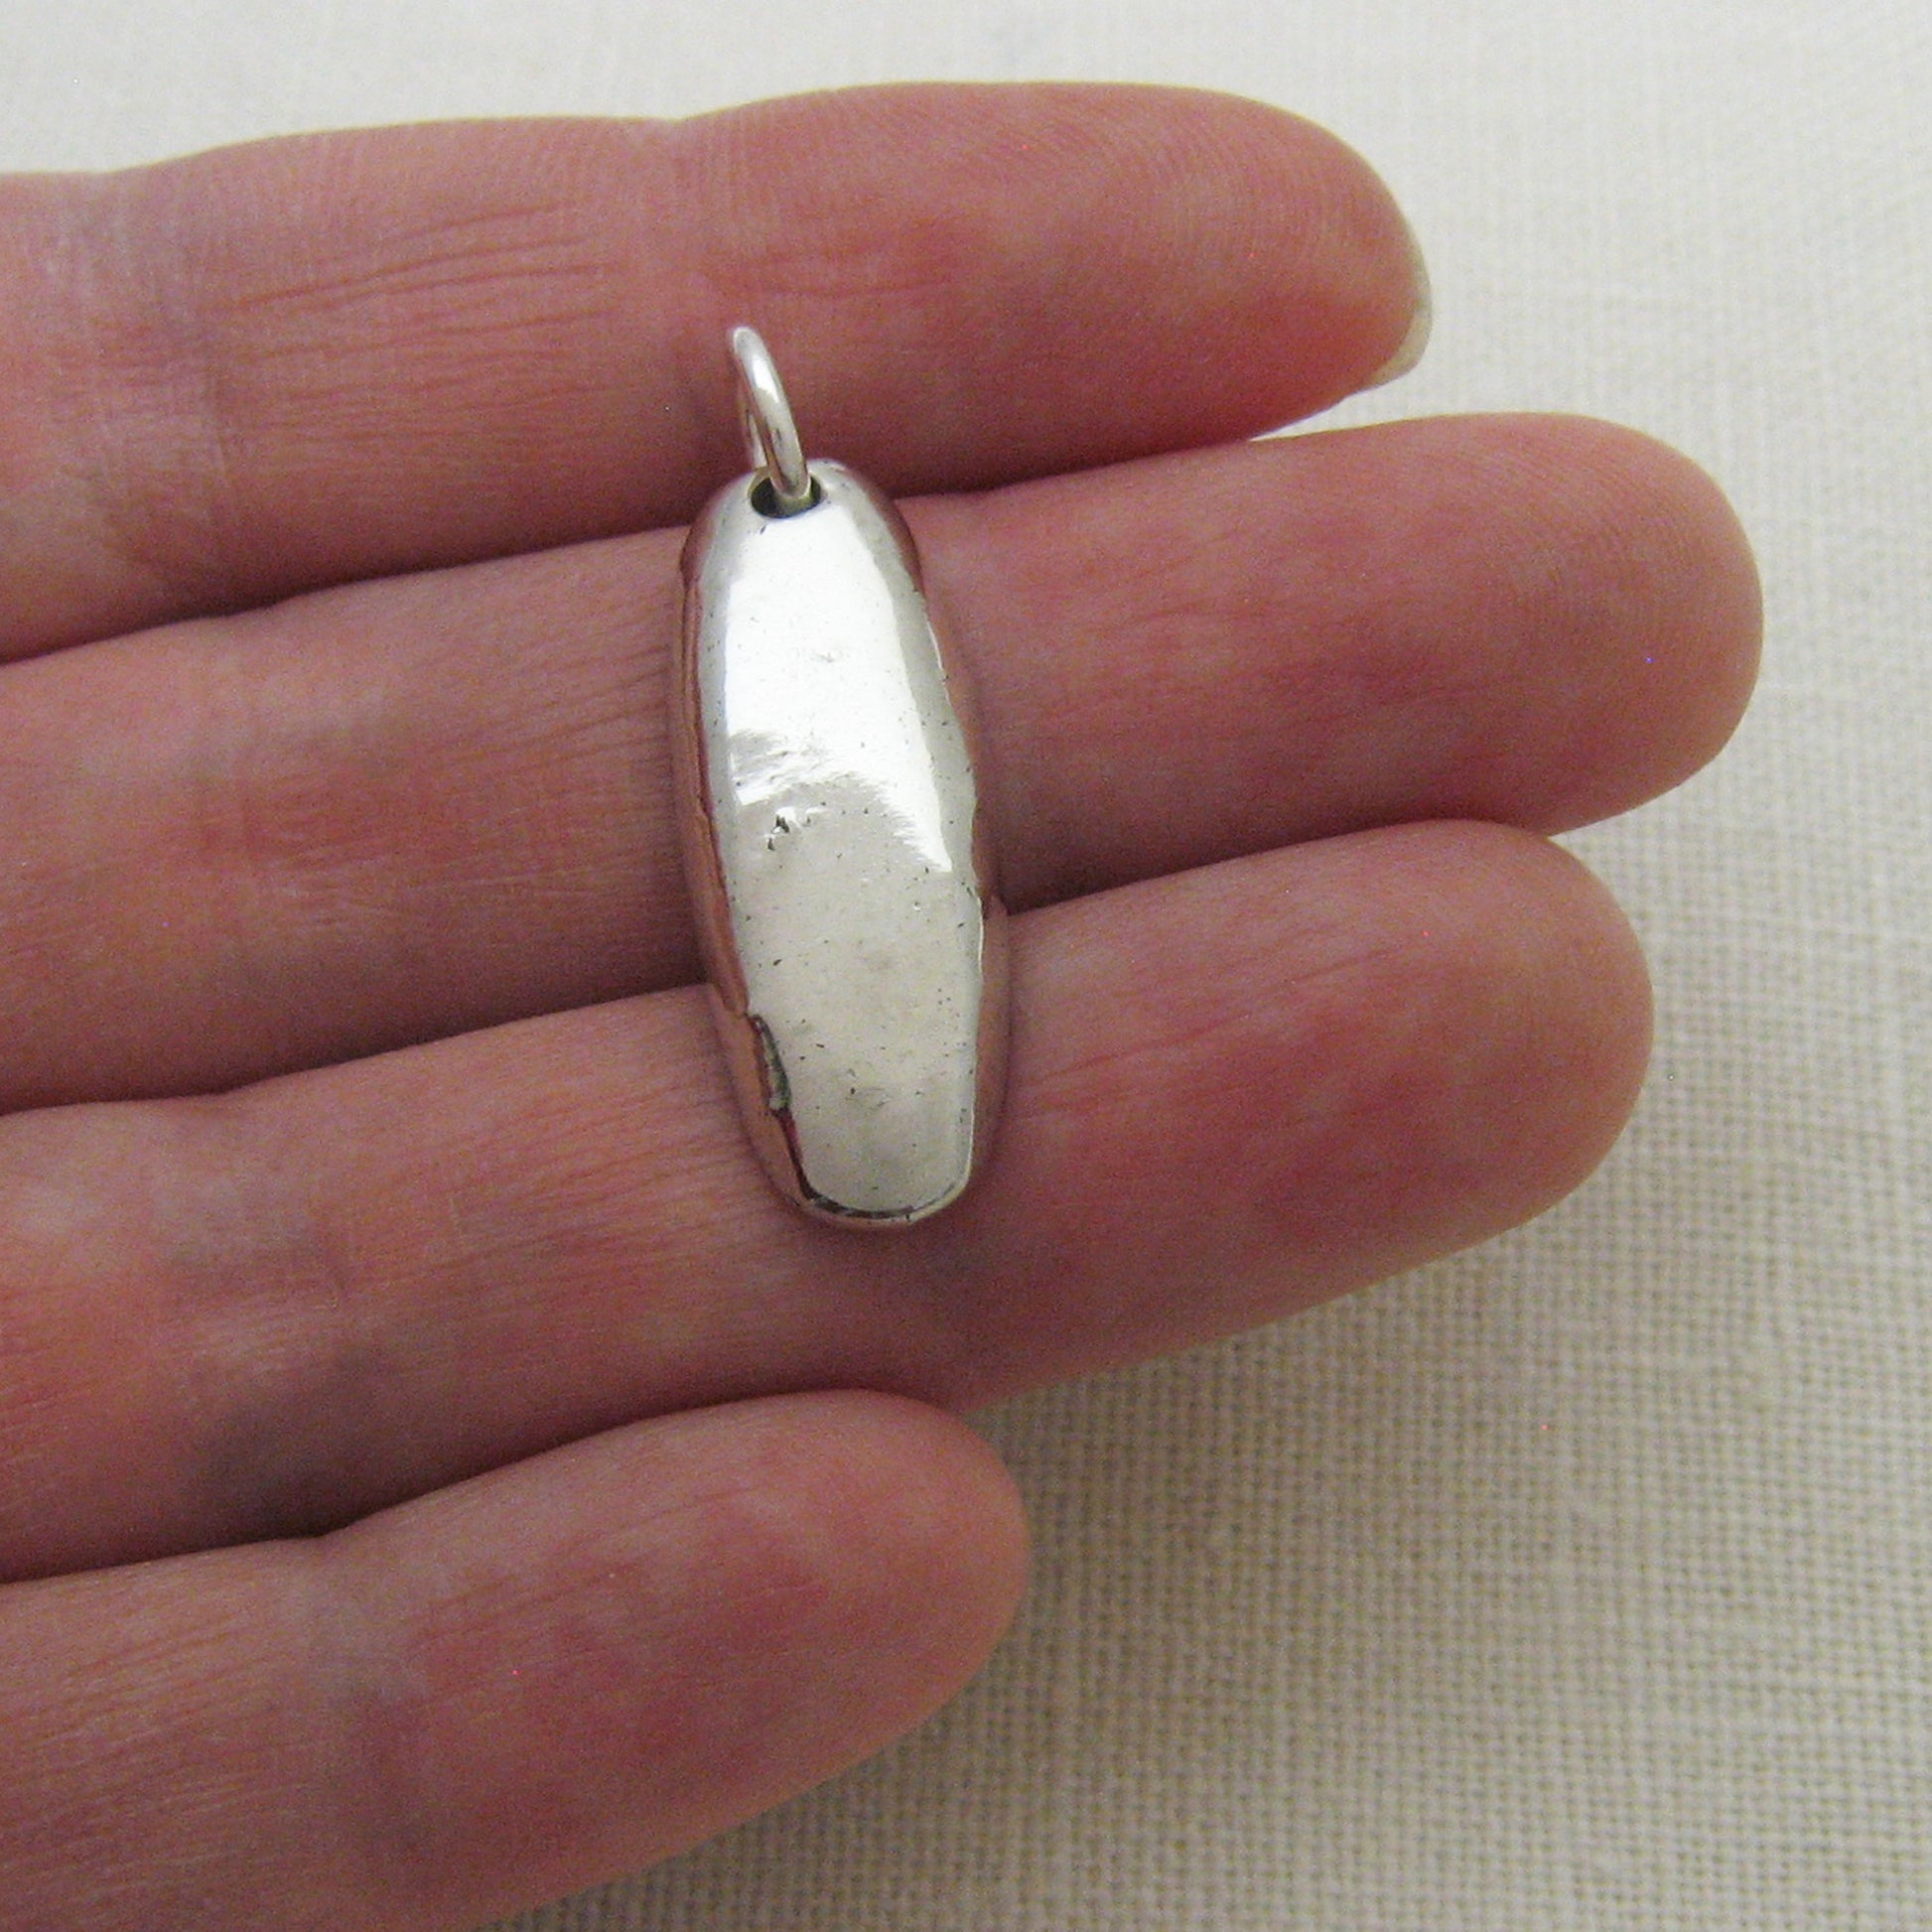 Silver Bar Cremation Ashes Pendant Shown on Hand for Size Reference